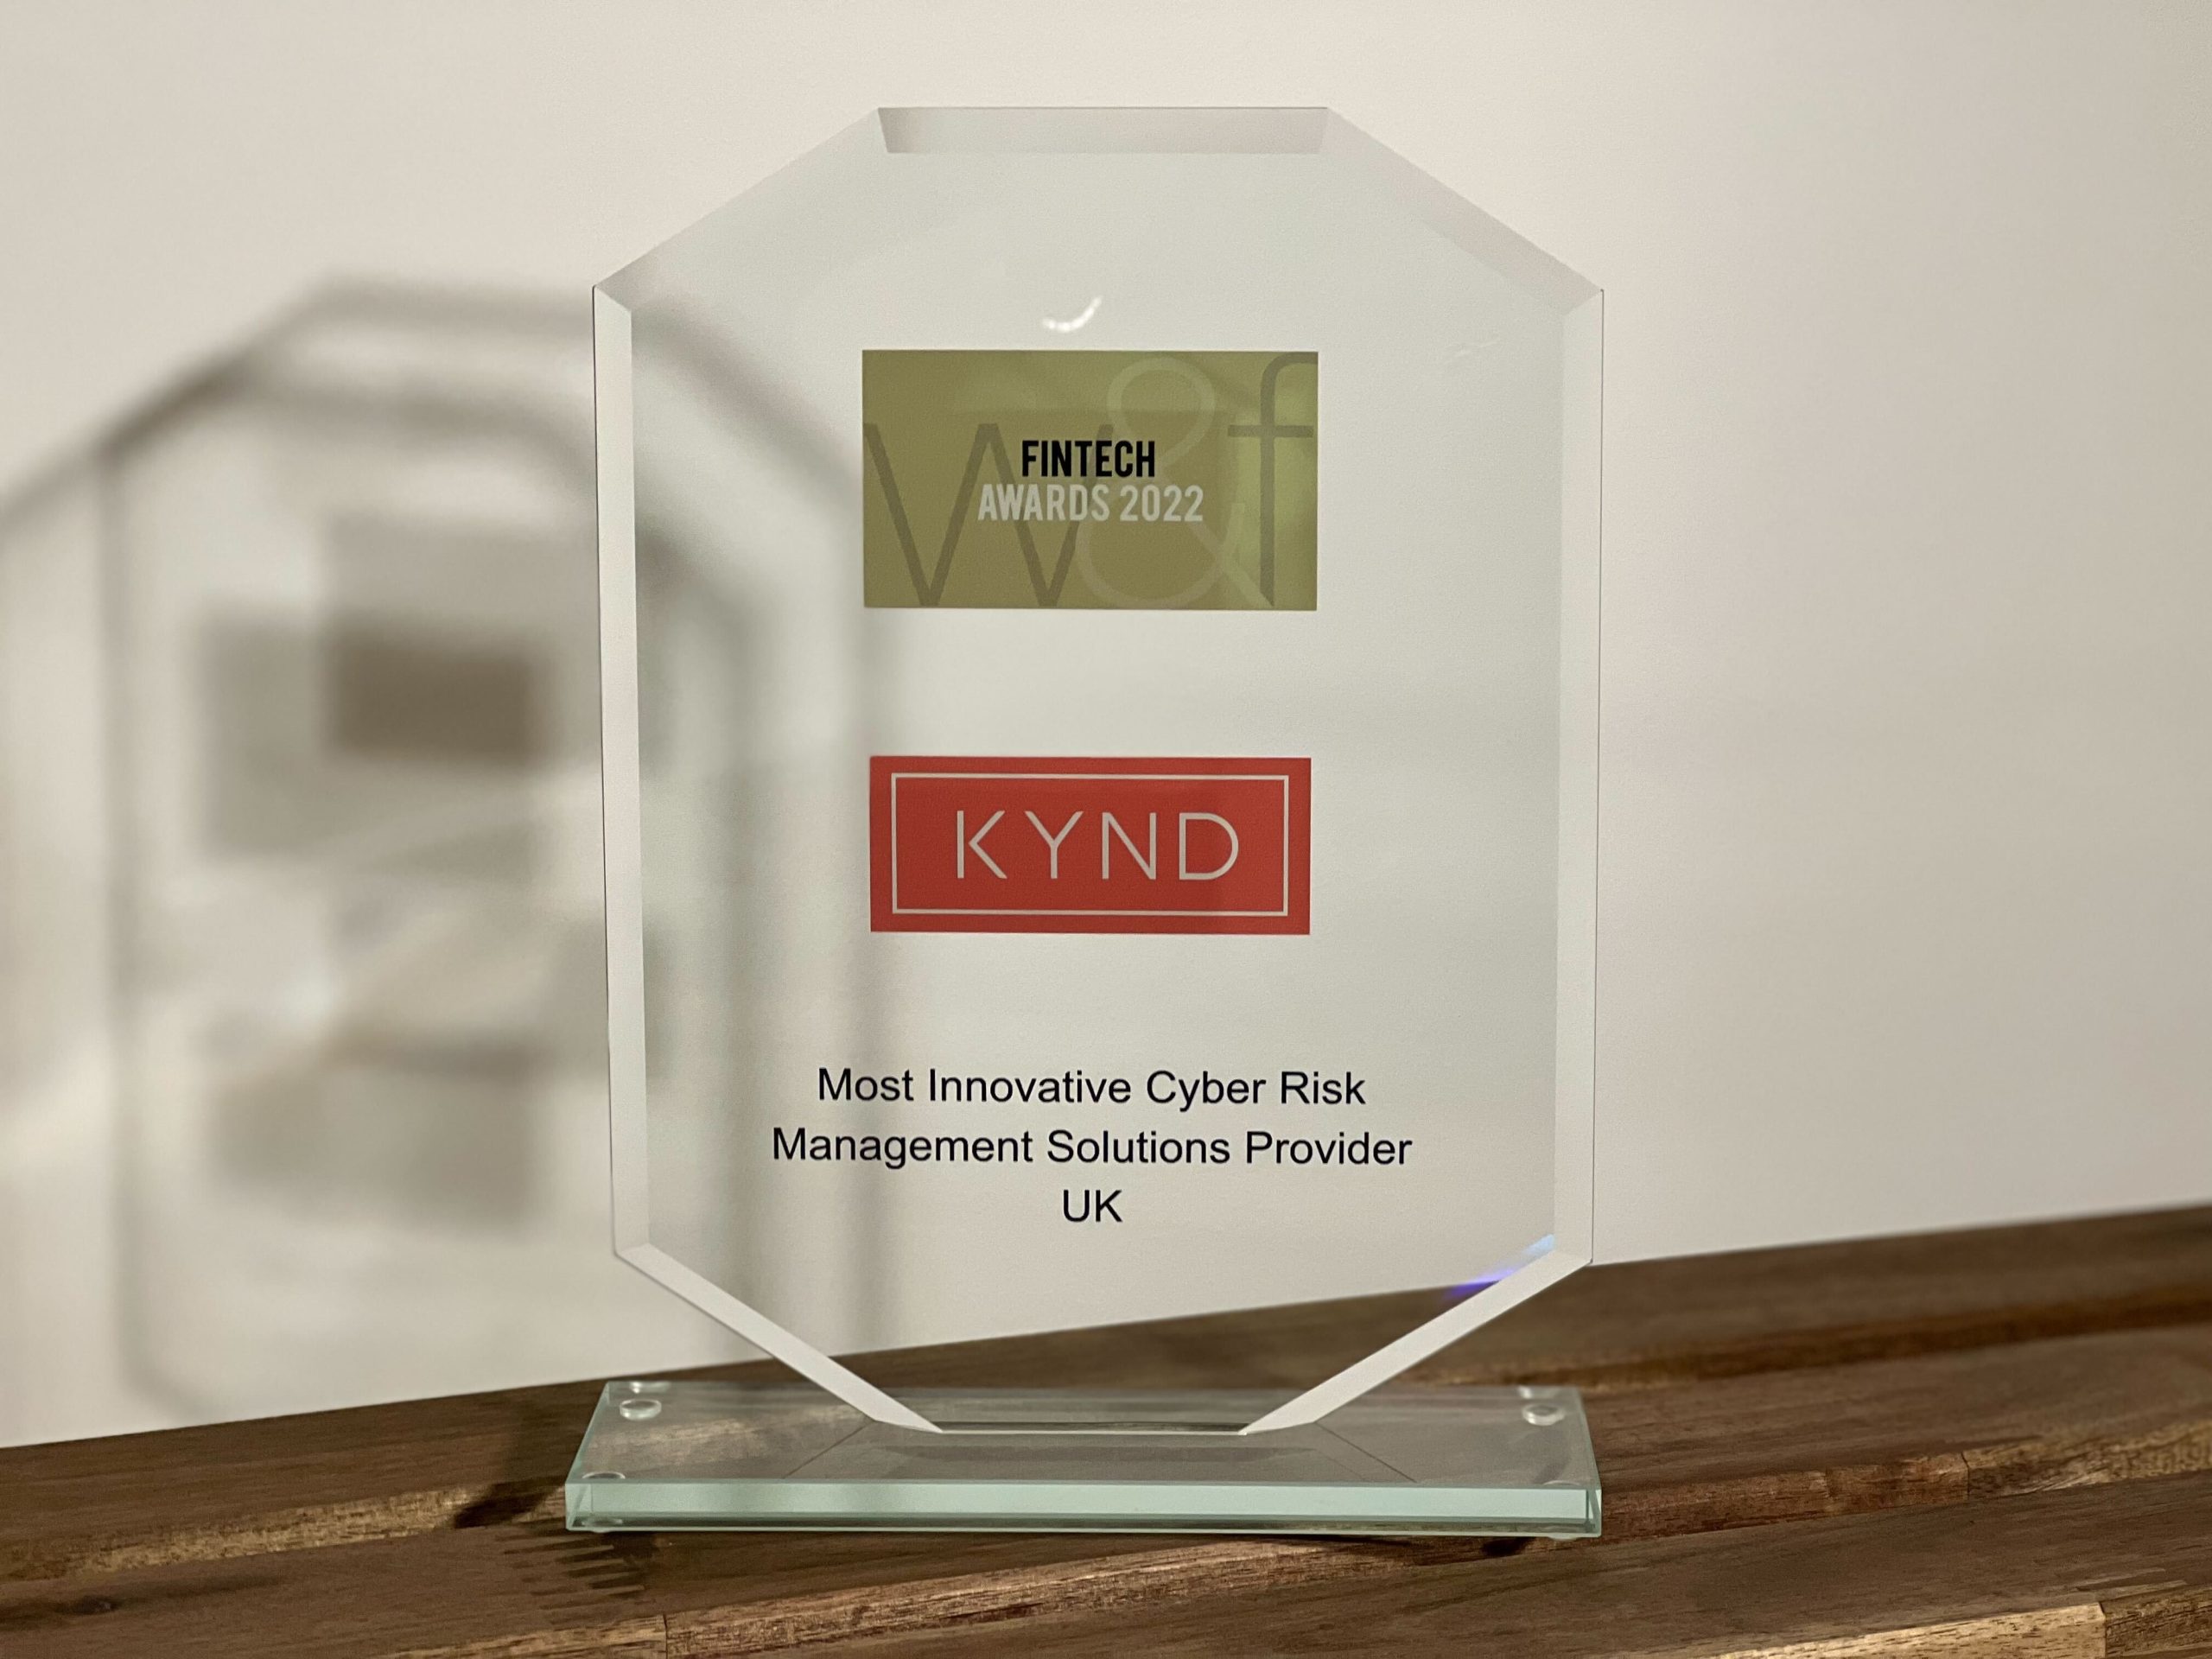 KYND wins 2022 FinTech Award for Most Innovative Cyber Risk Management Solutions Provider